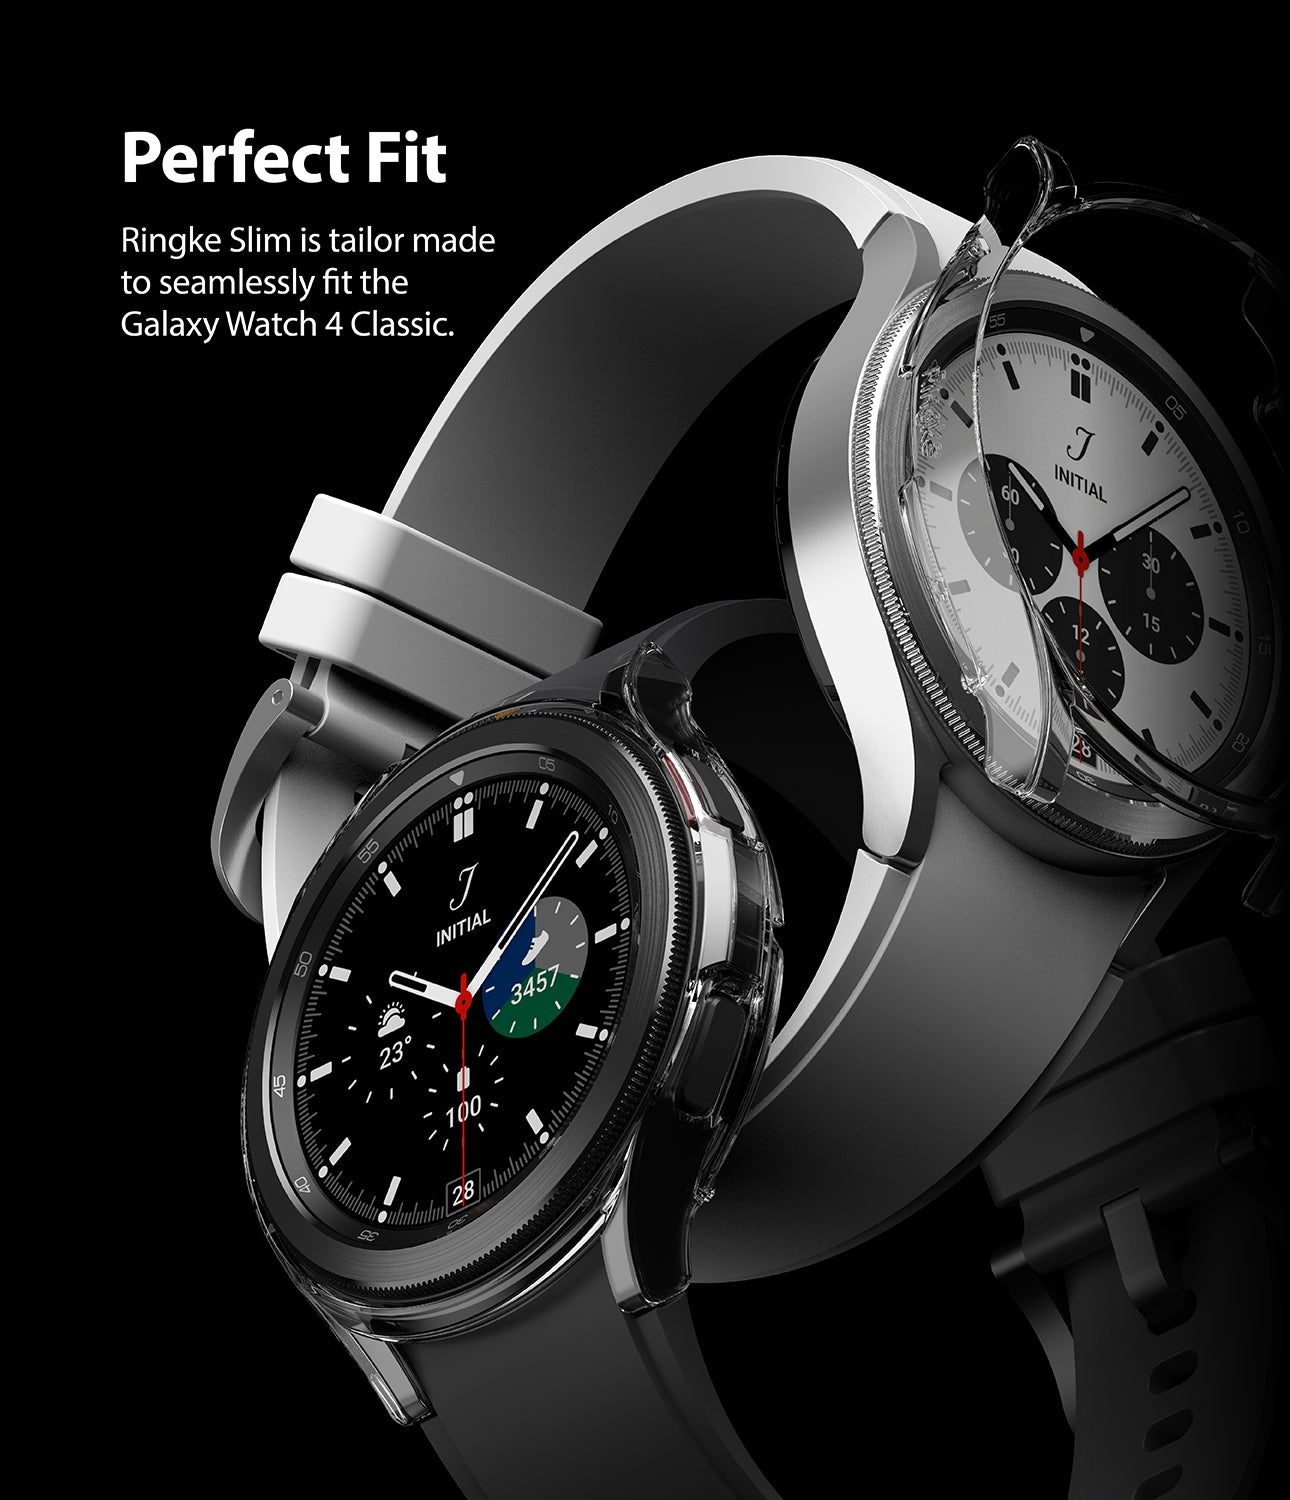 tailor made to fit the Galaxy Watch 4 Classic 46mm